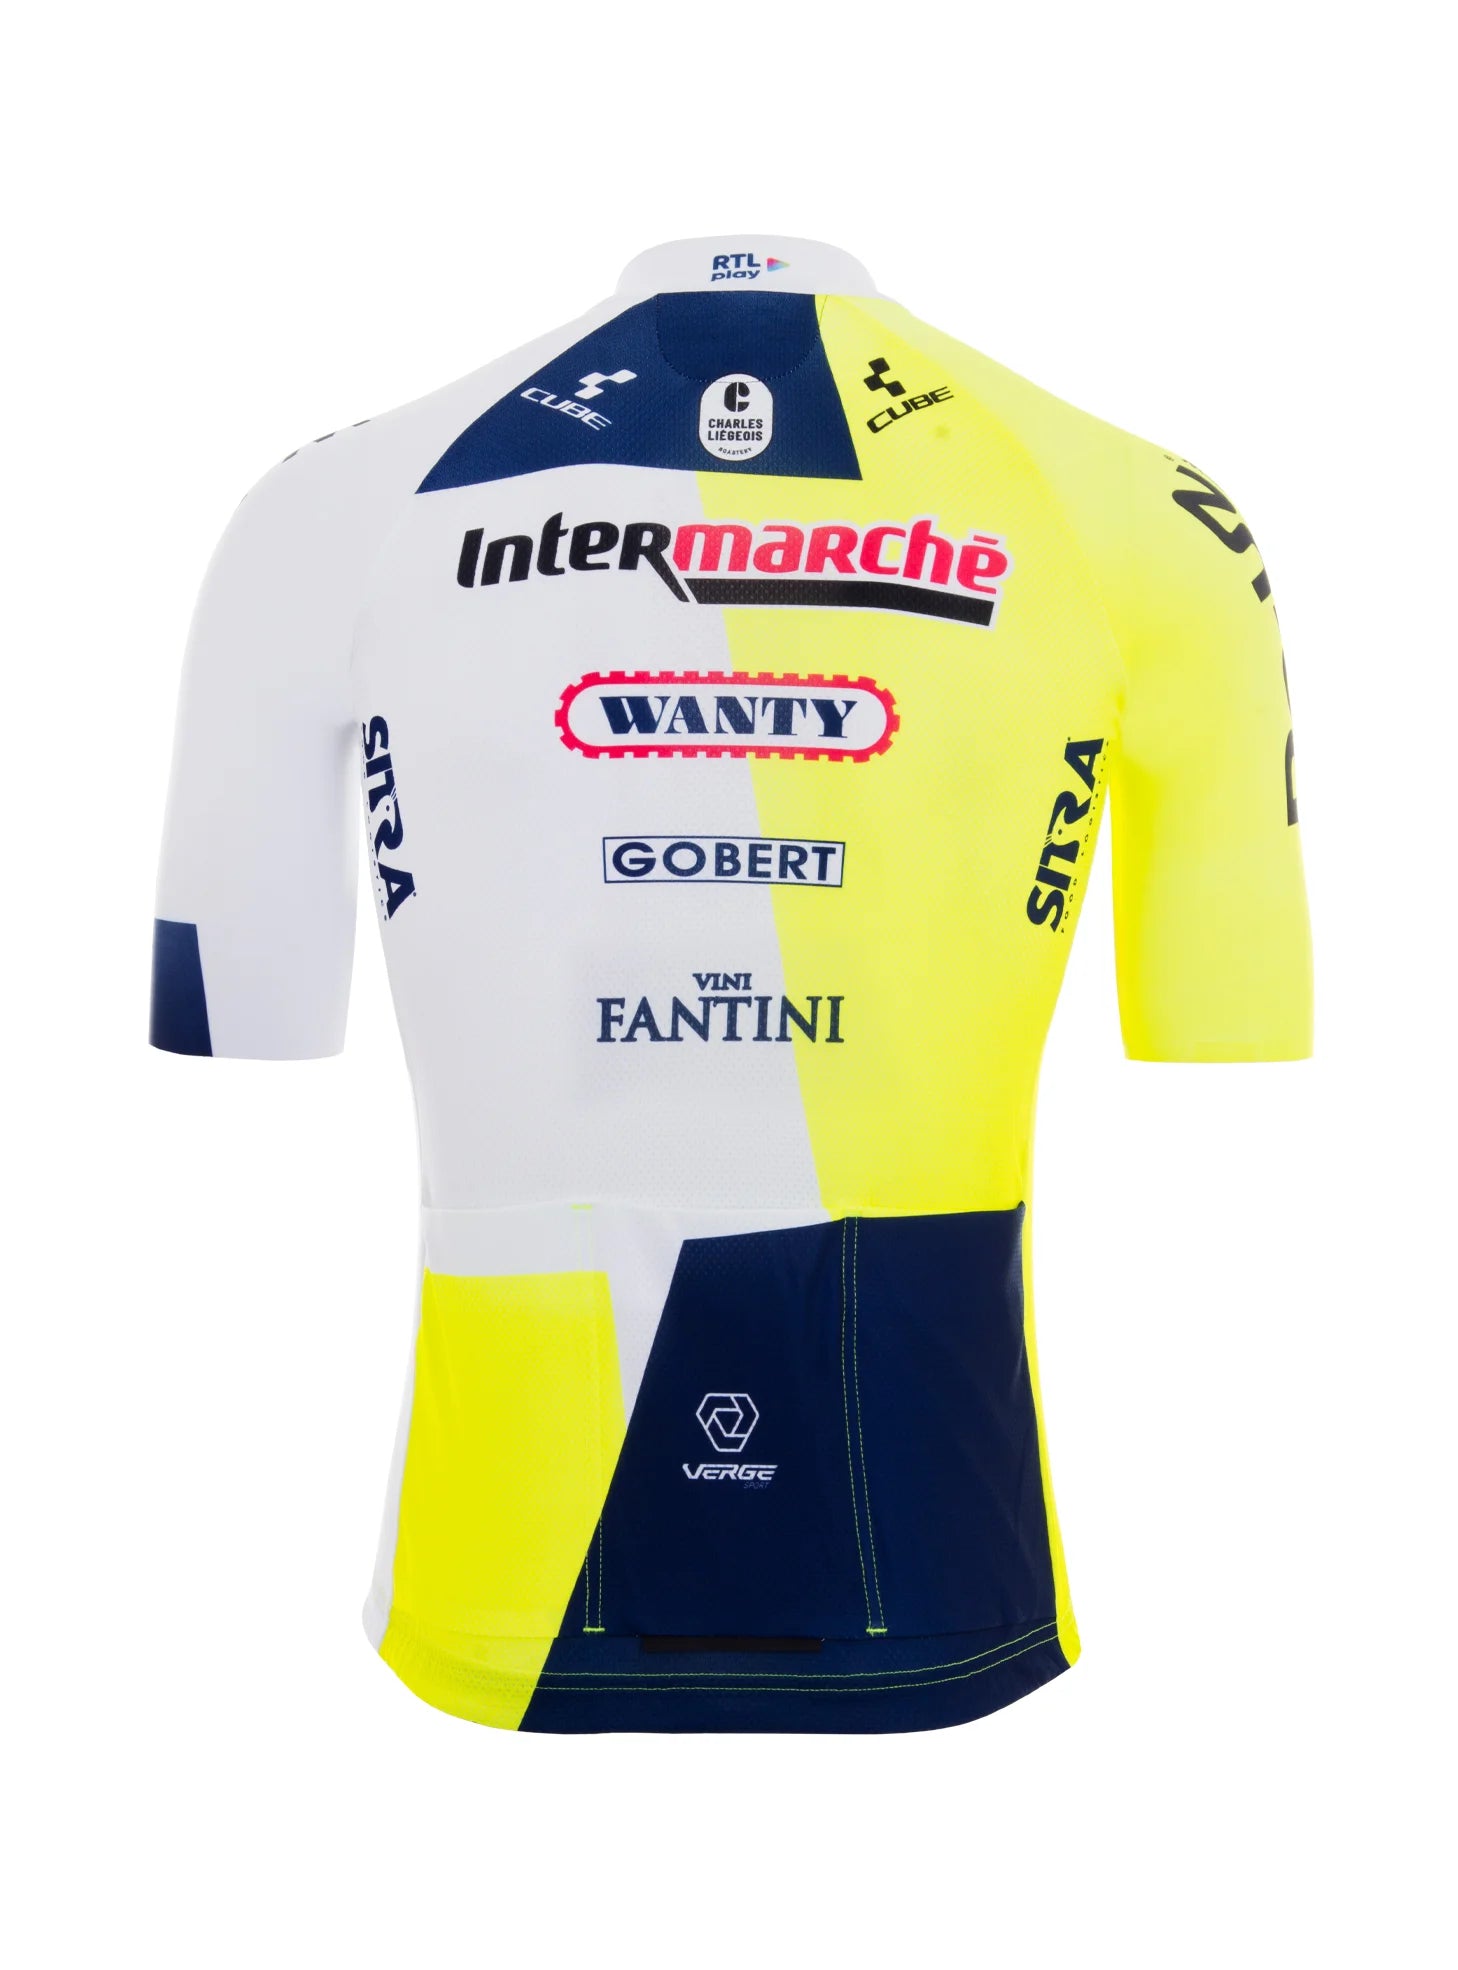 MAILLOT OFFICIEL STRIKE 4.0 EQUIPE INTERMARCHÉ-WANTY 